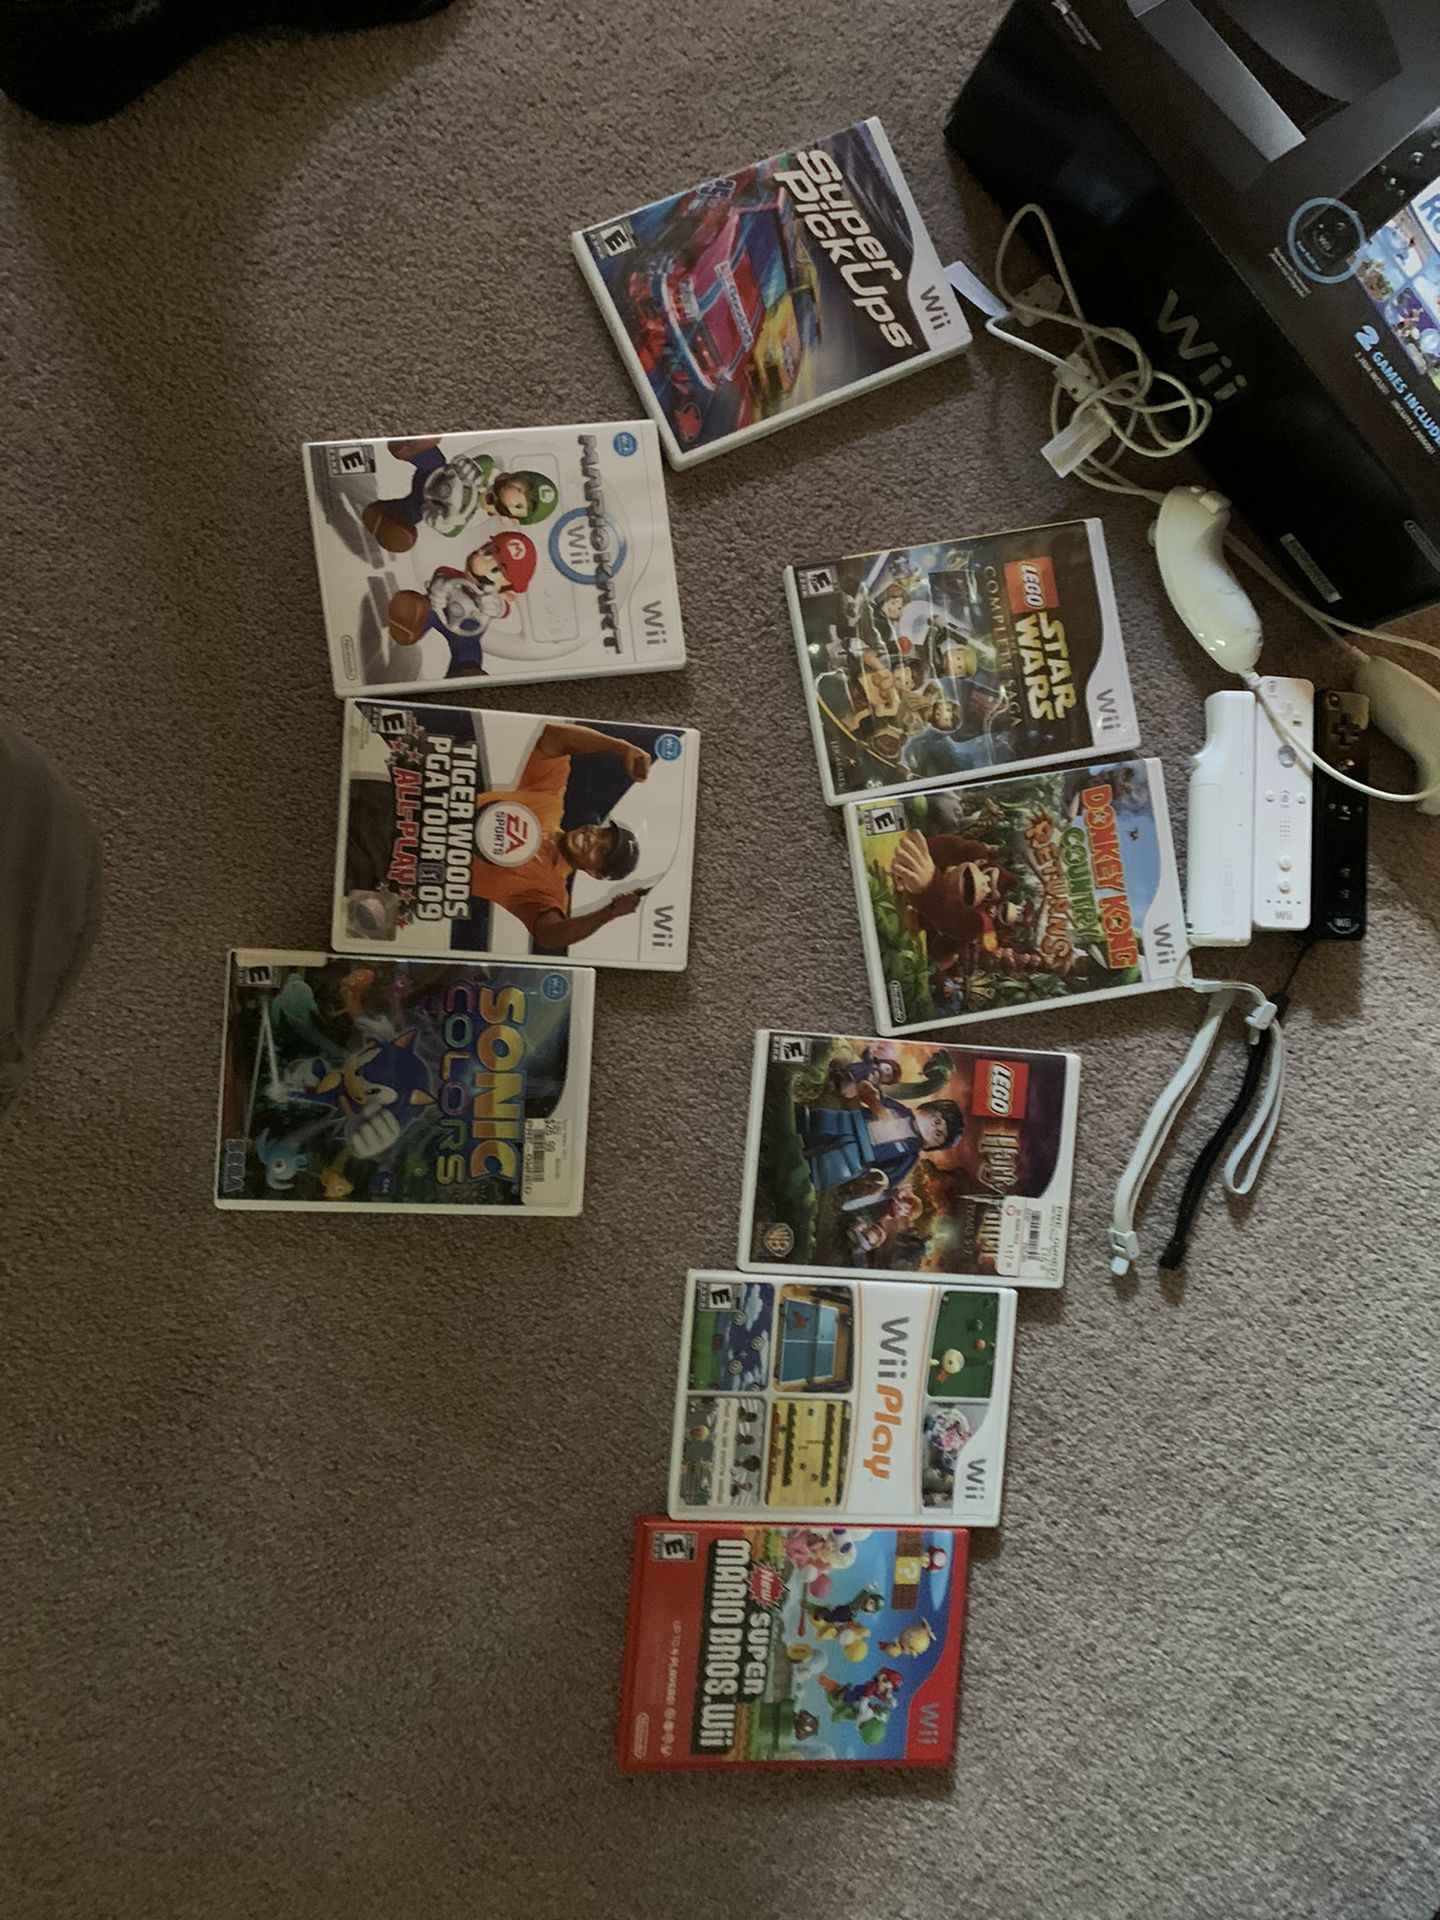 Wii system. With games and controllers